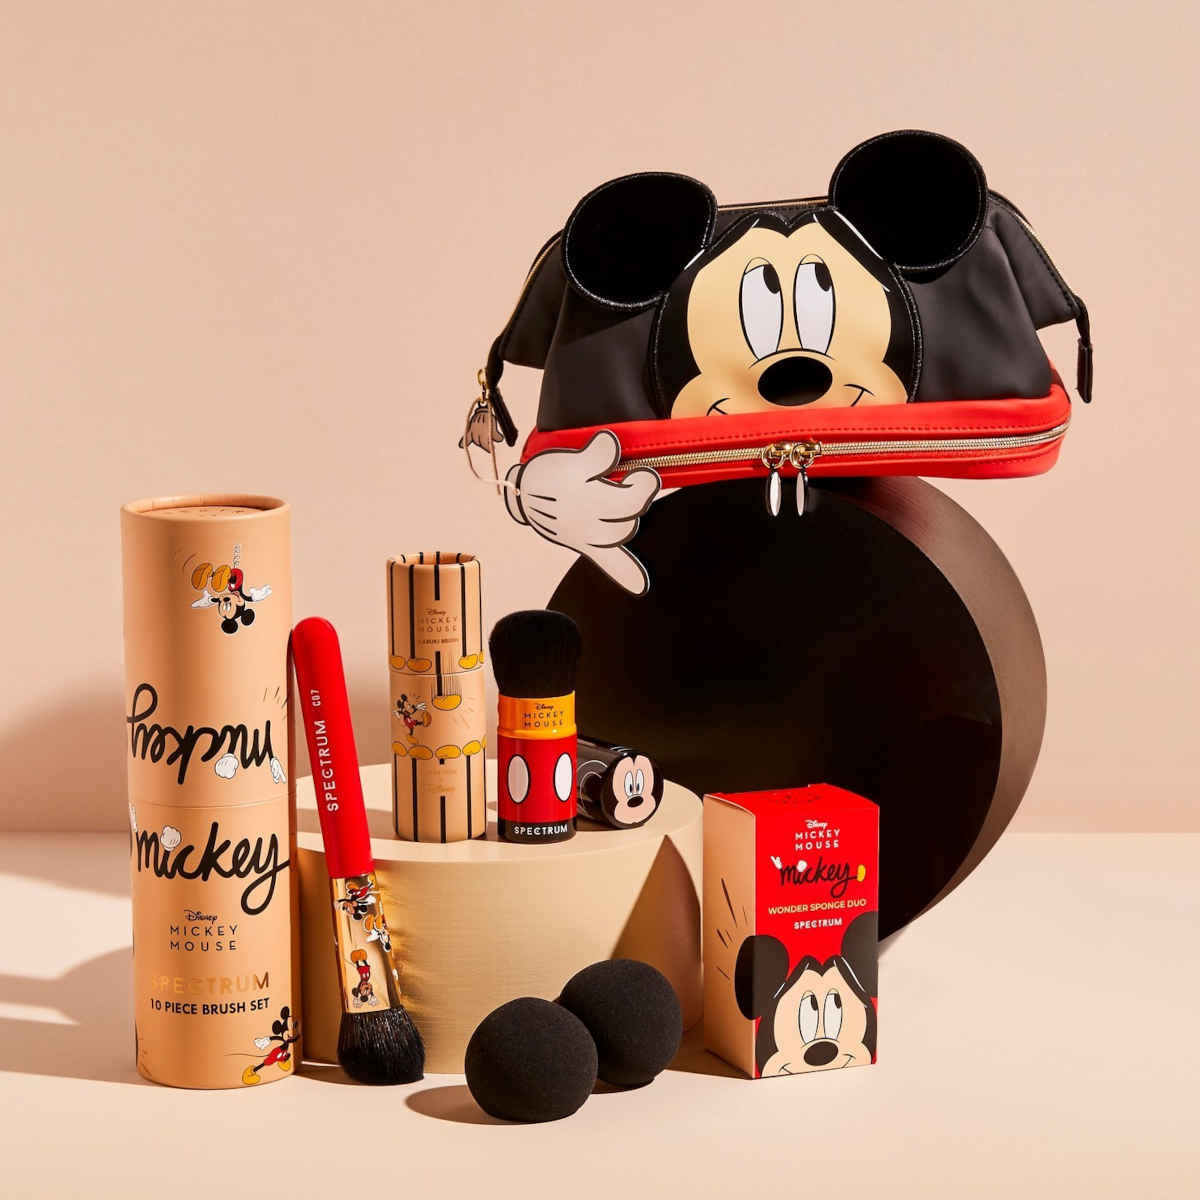 Pennelli trucco Mickey Mouse Spectrum